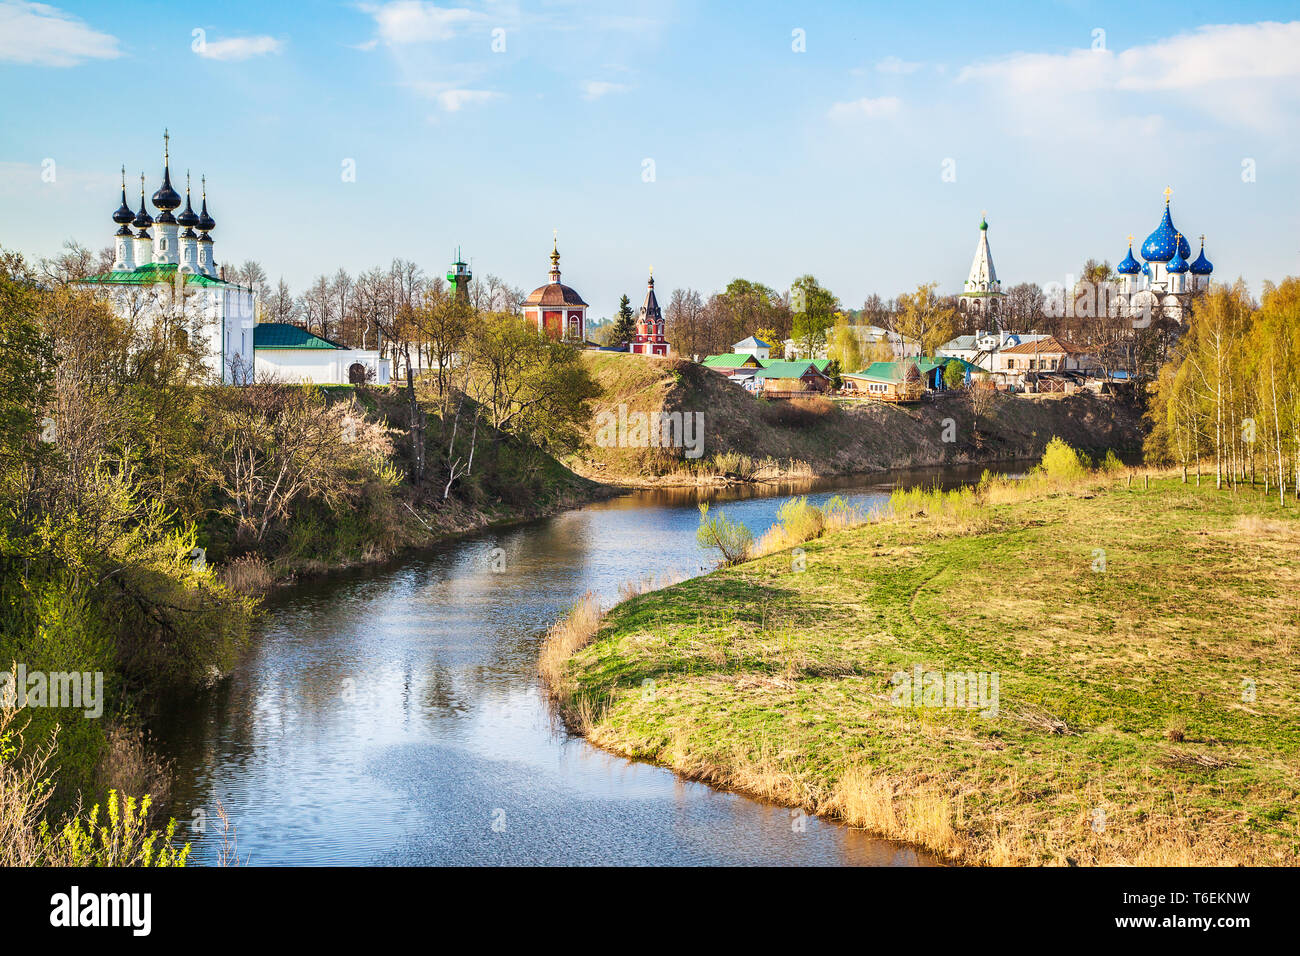 Ancient city of Suzdal. Stock Photo